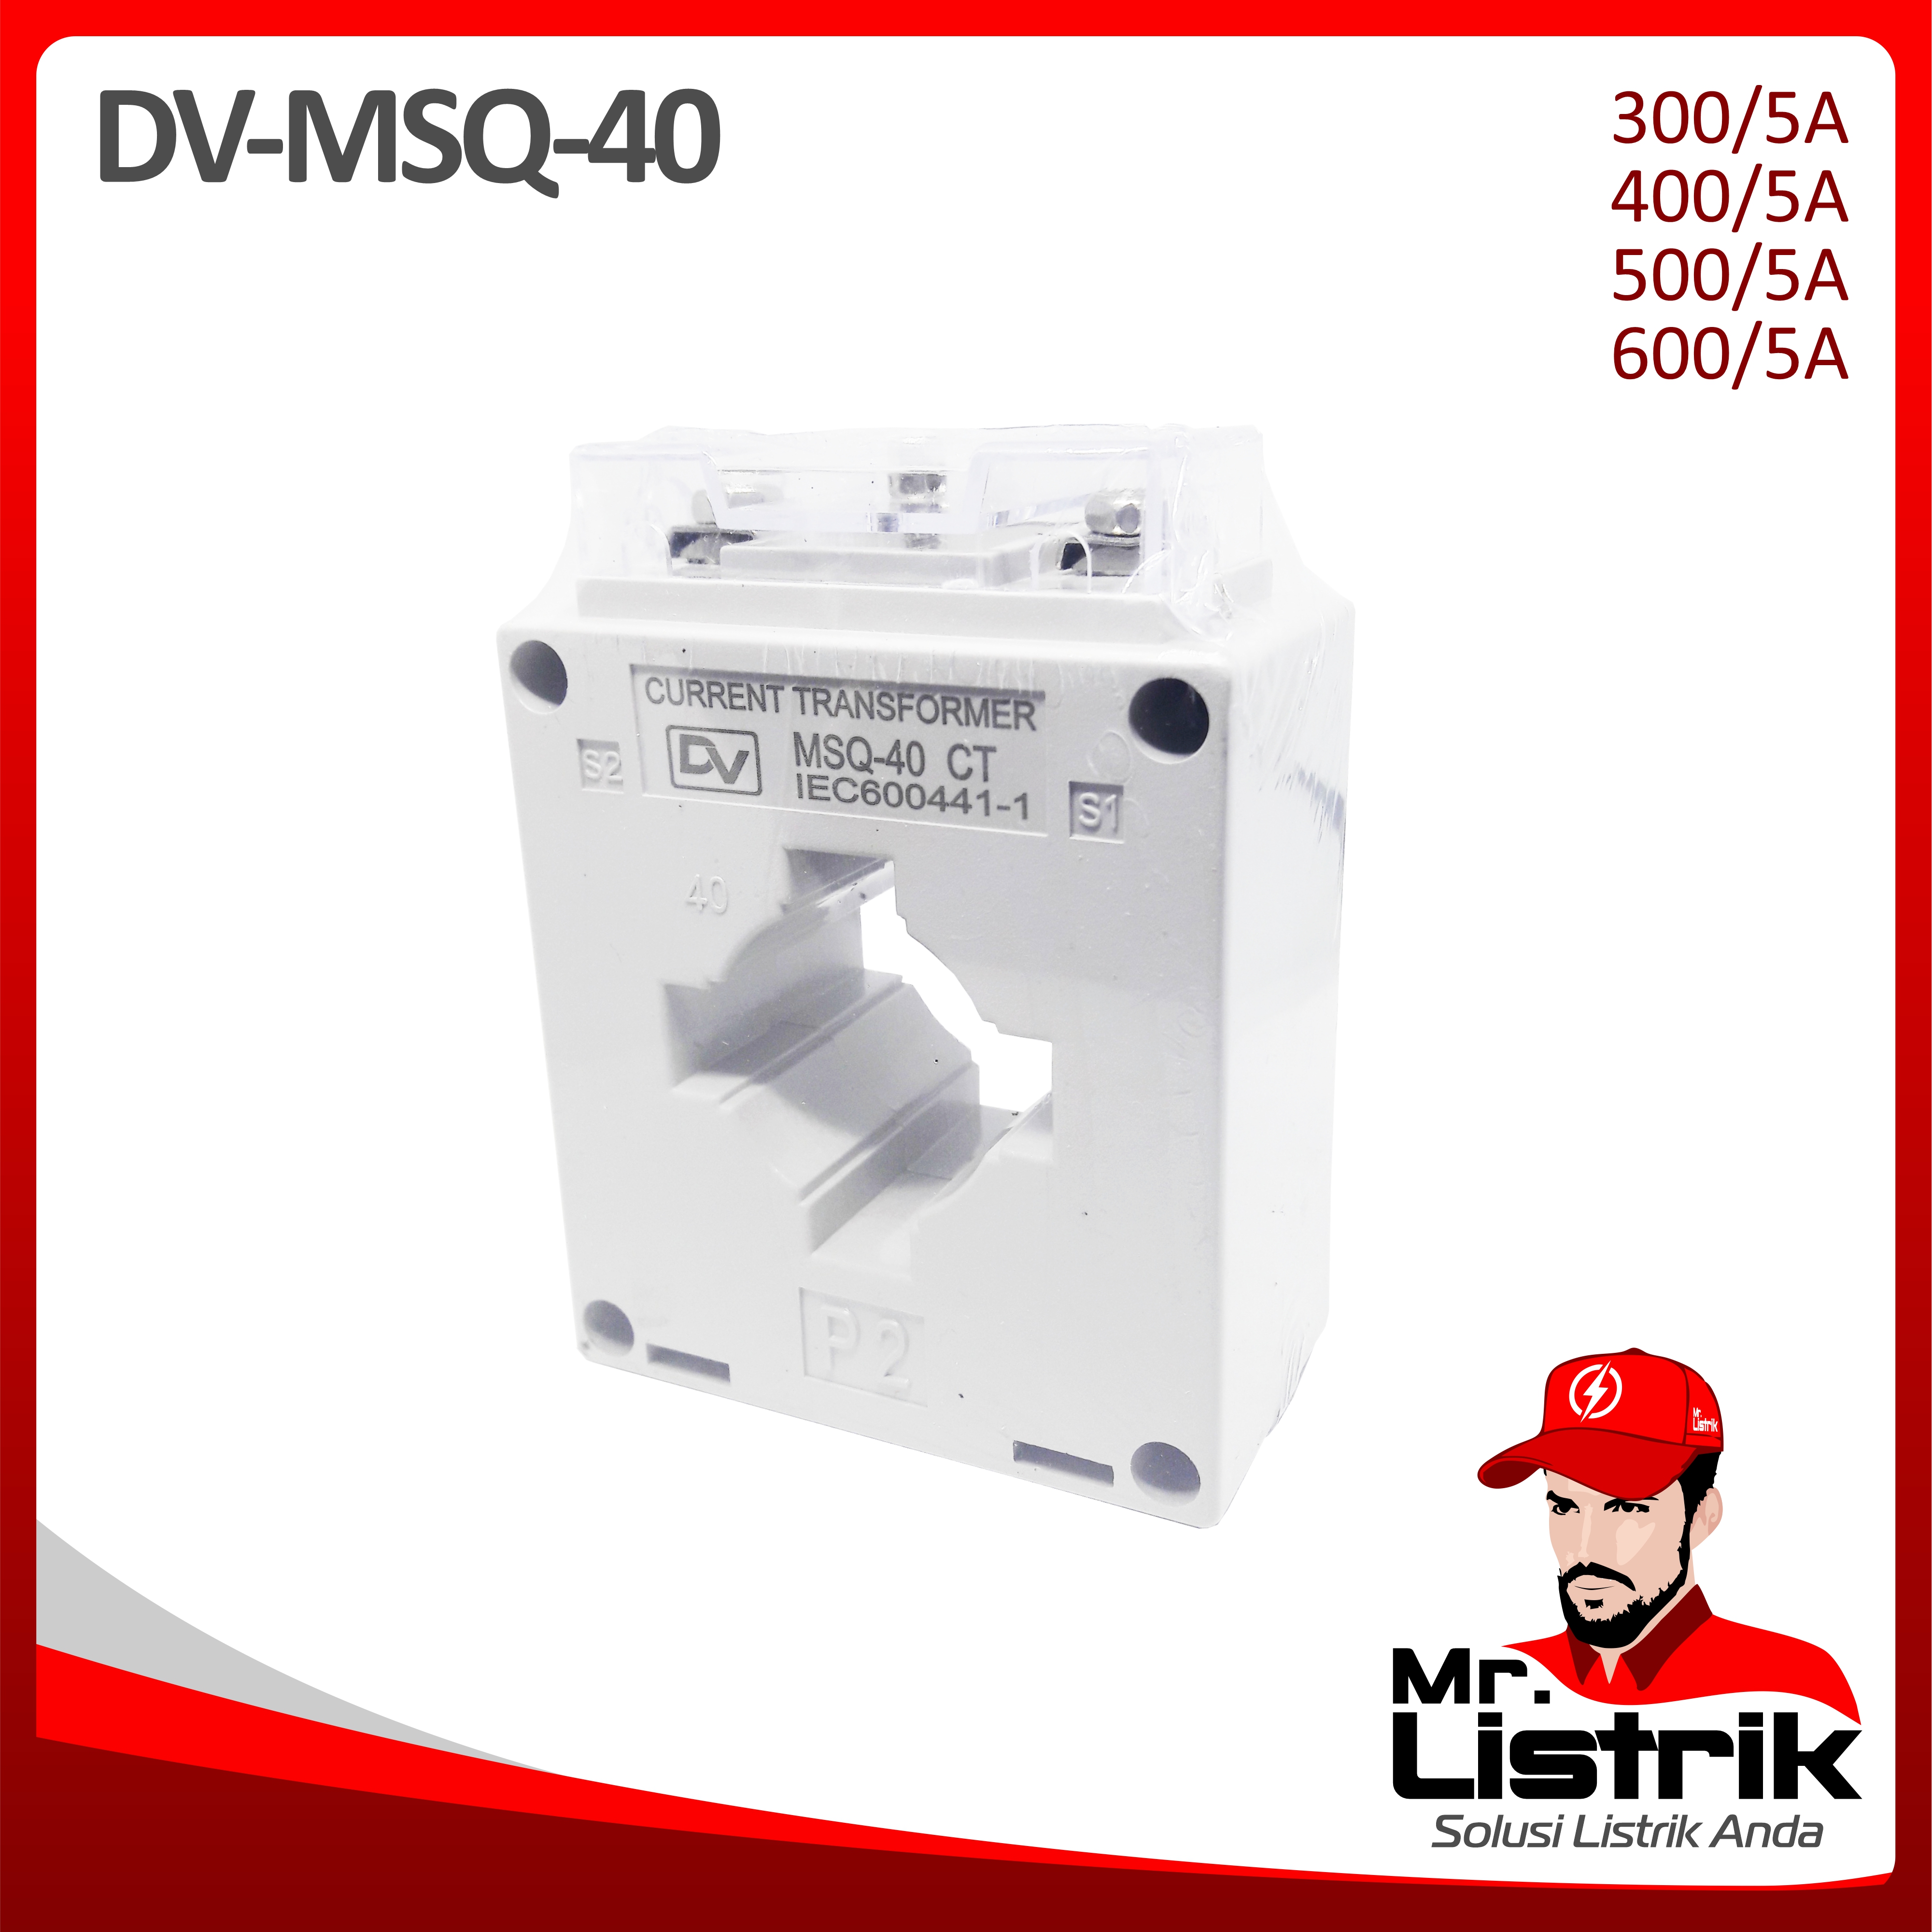 Current Transformer DV Fixed Type MSQ-40 600/5A